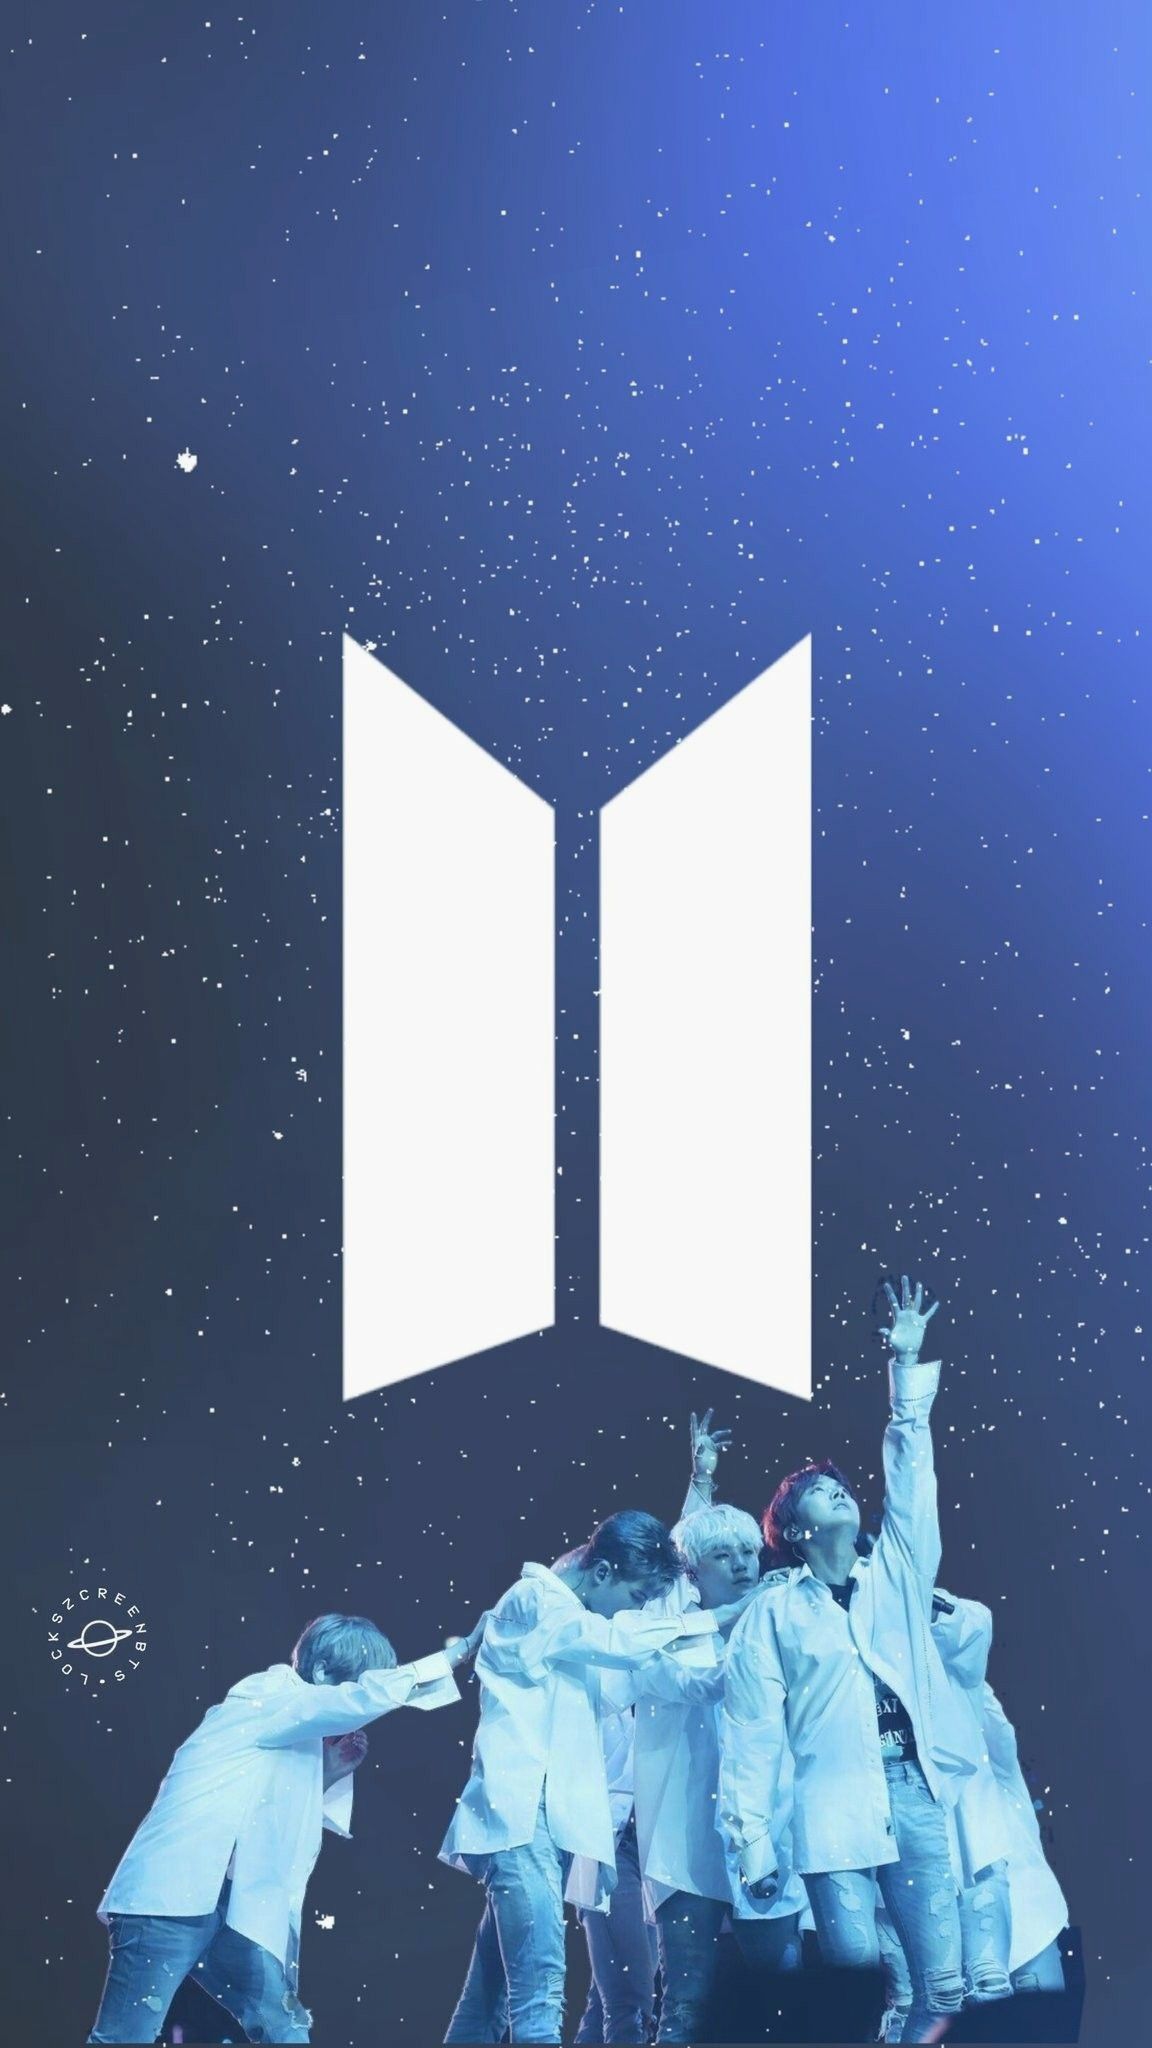 Bts Army Pic Wallpaper Bts Army Wallpapers Wallpaper Cave C The Best